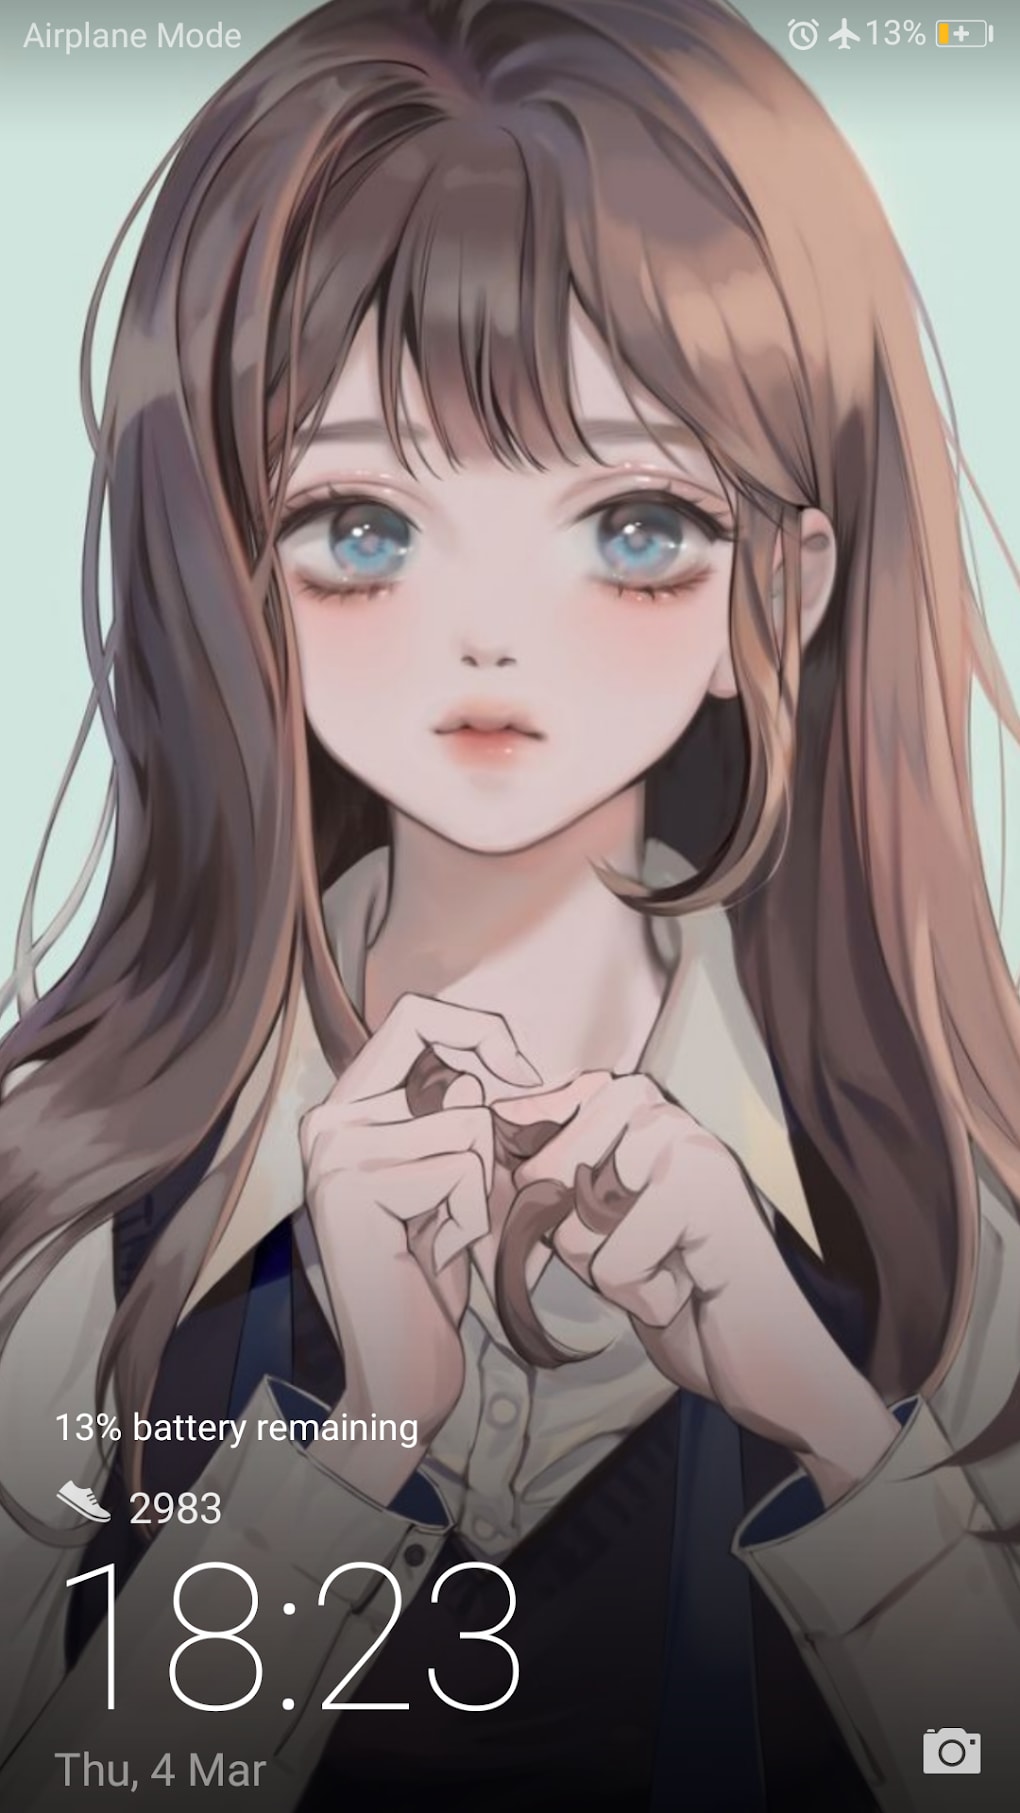 AI Anime Girl Wallpapers HD APK for Android - Latest Version (Free